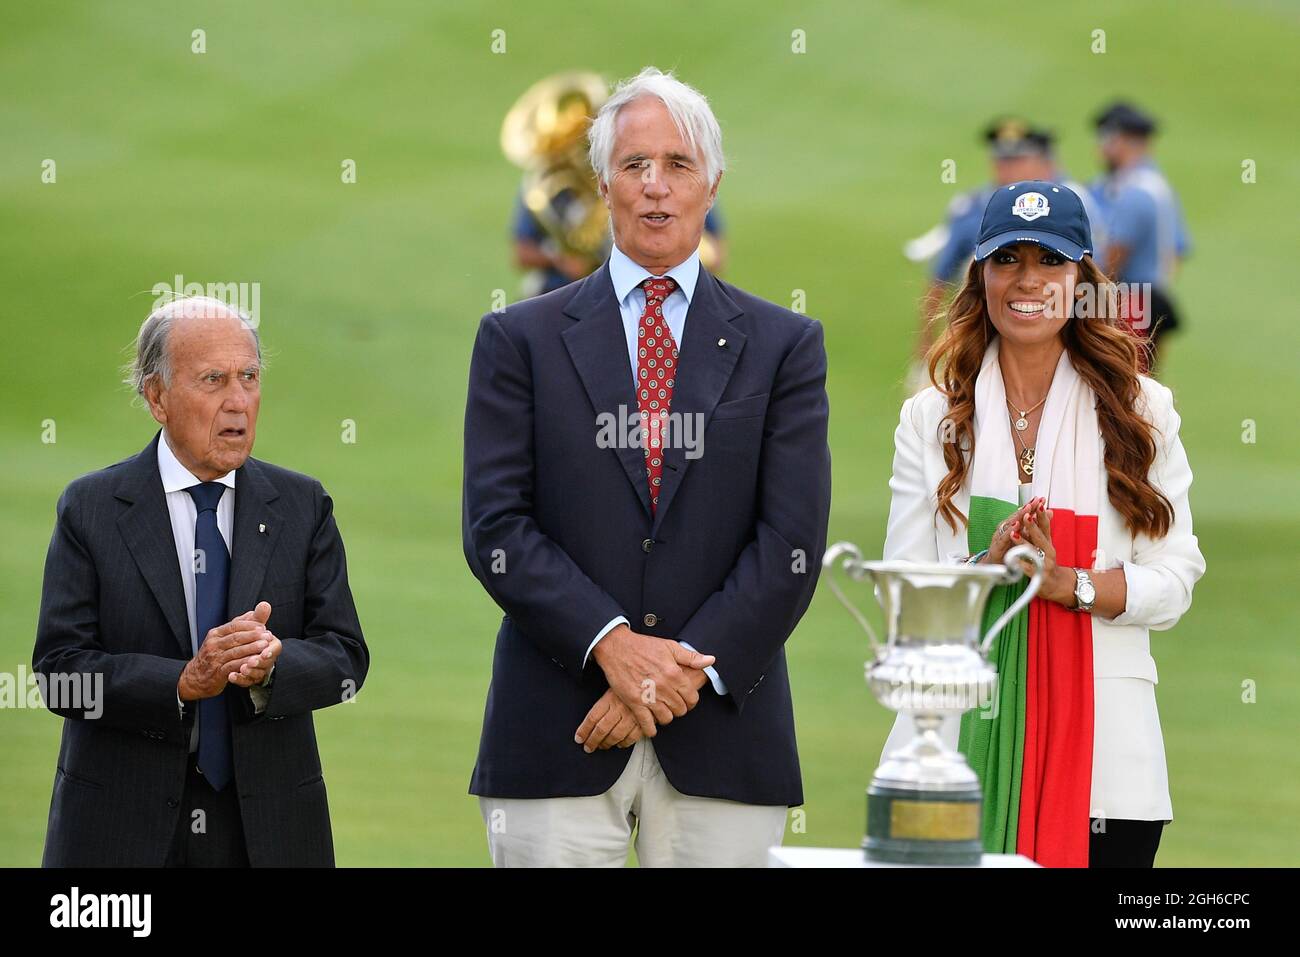 Franco Chimenti Giovanni Malago’ and Lavinia Biagiotti during the 4 round of the DS Automobiles 78th Italian Golf Open at Marco Simone Golf Club on September 05, 2021 in Rome Italy Stock Photo